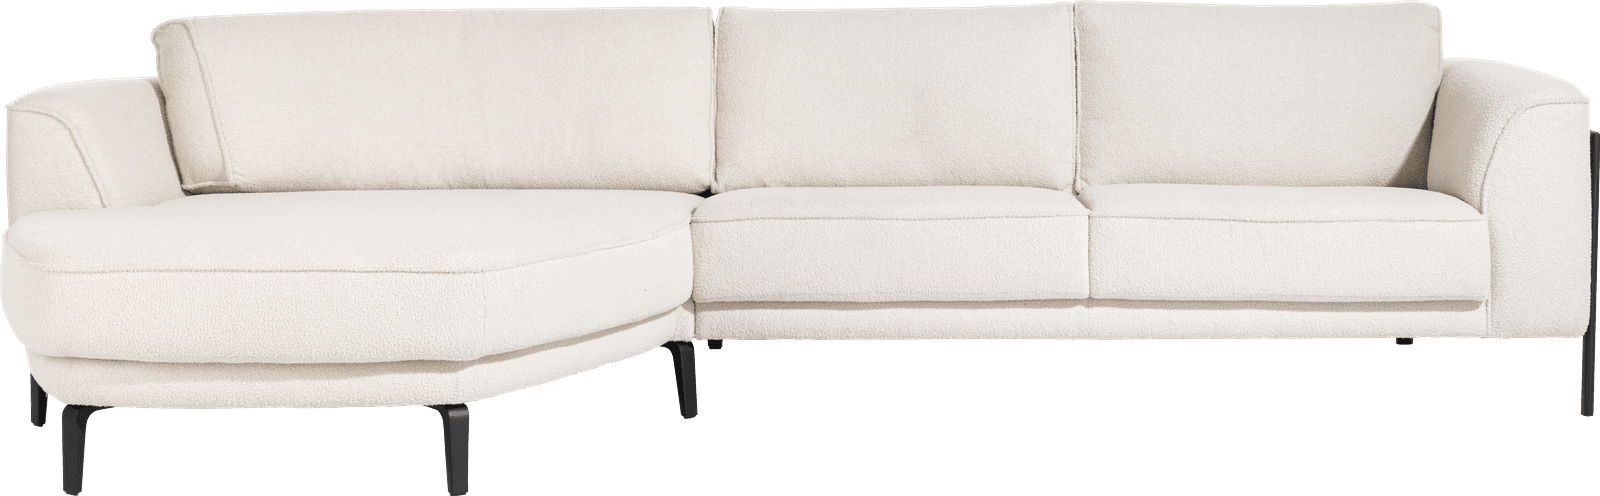 Henders and Hazel - Langley - Sofas - 2,5 Sitzer Armlehne rechts - Longchair curved links